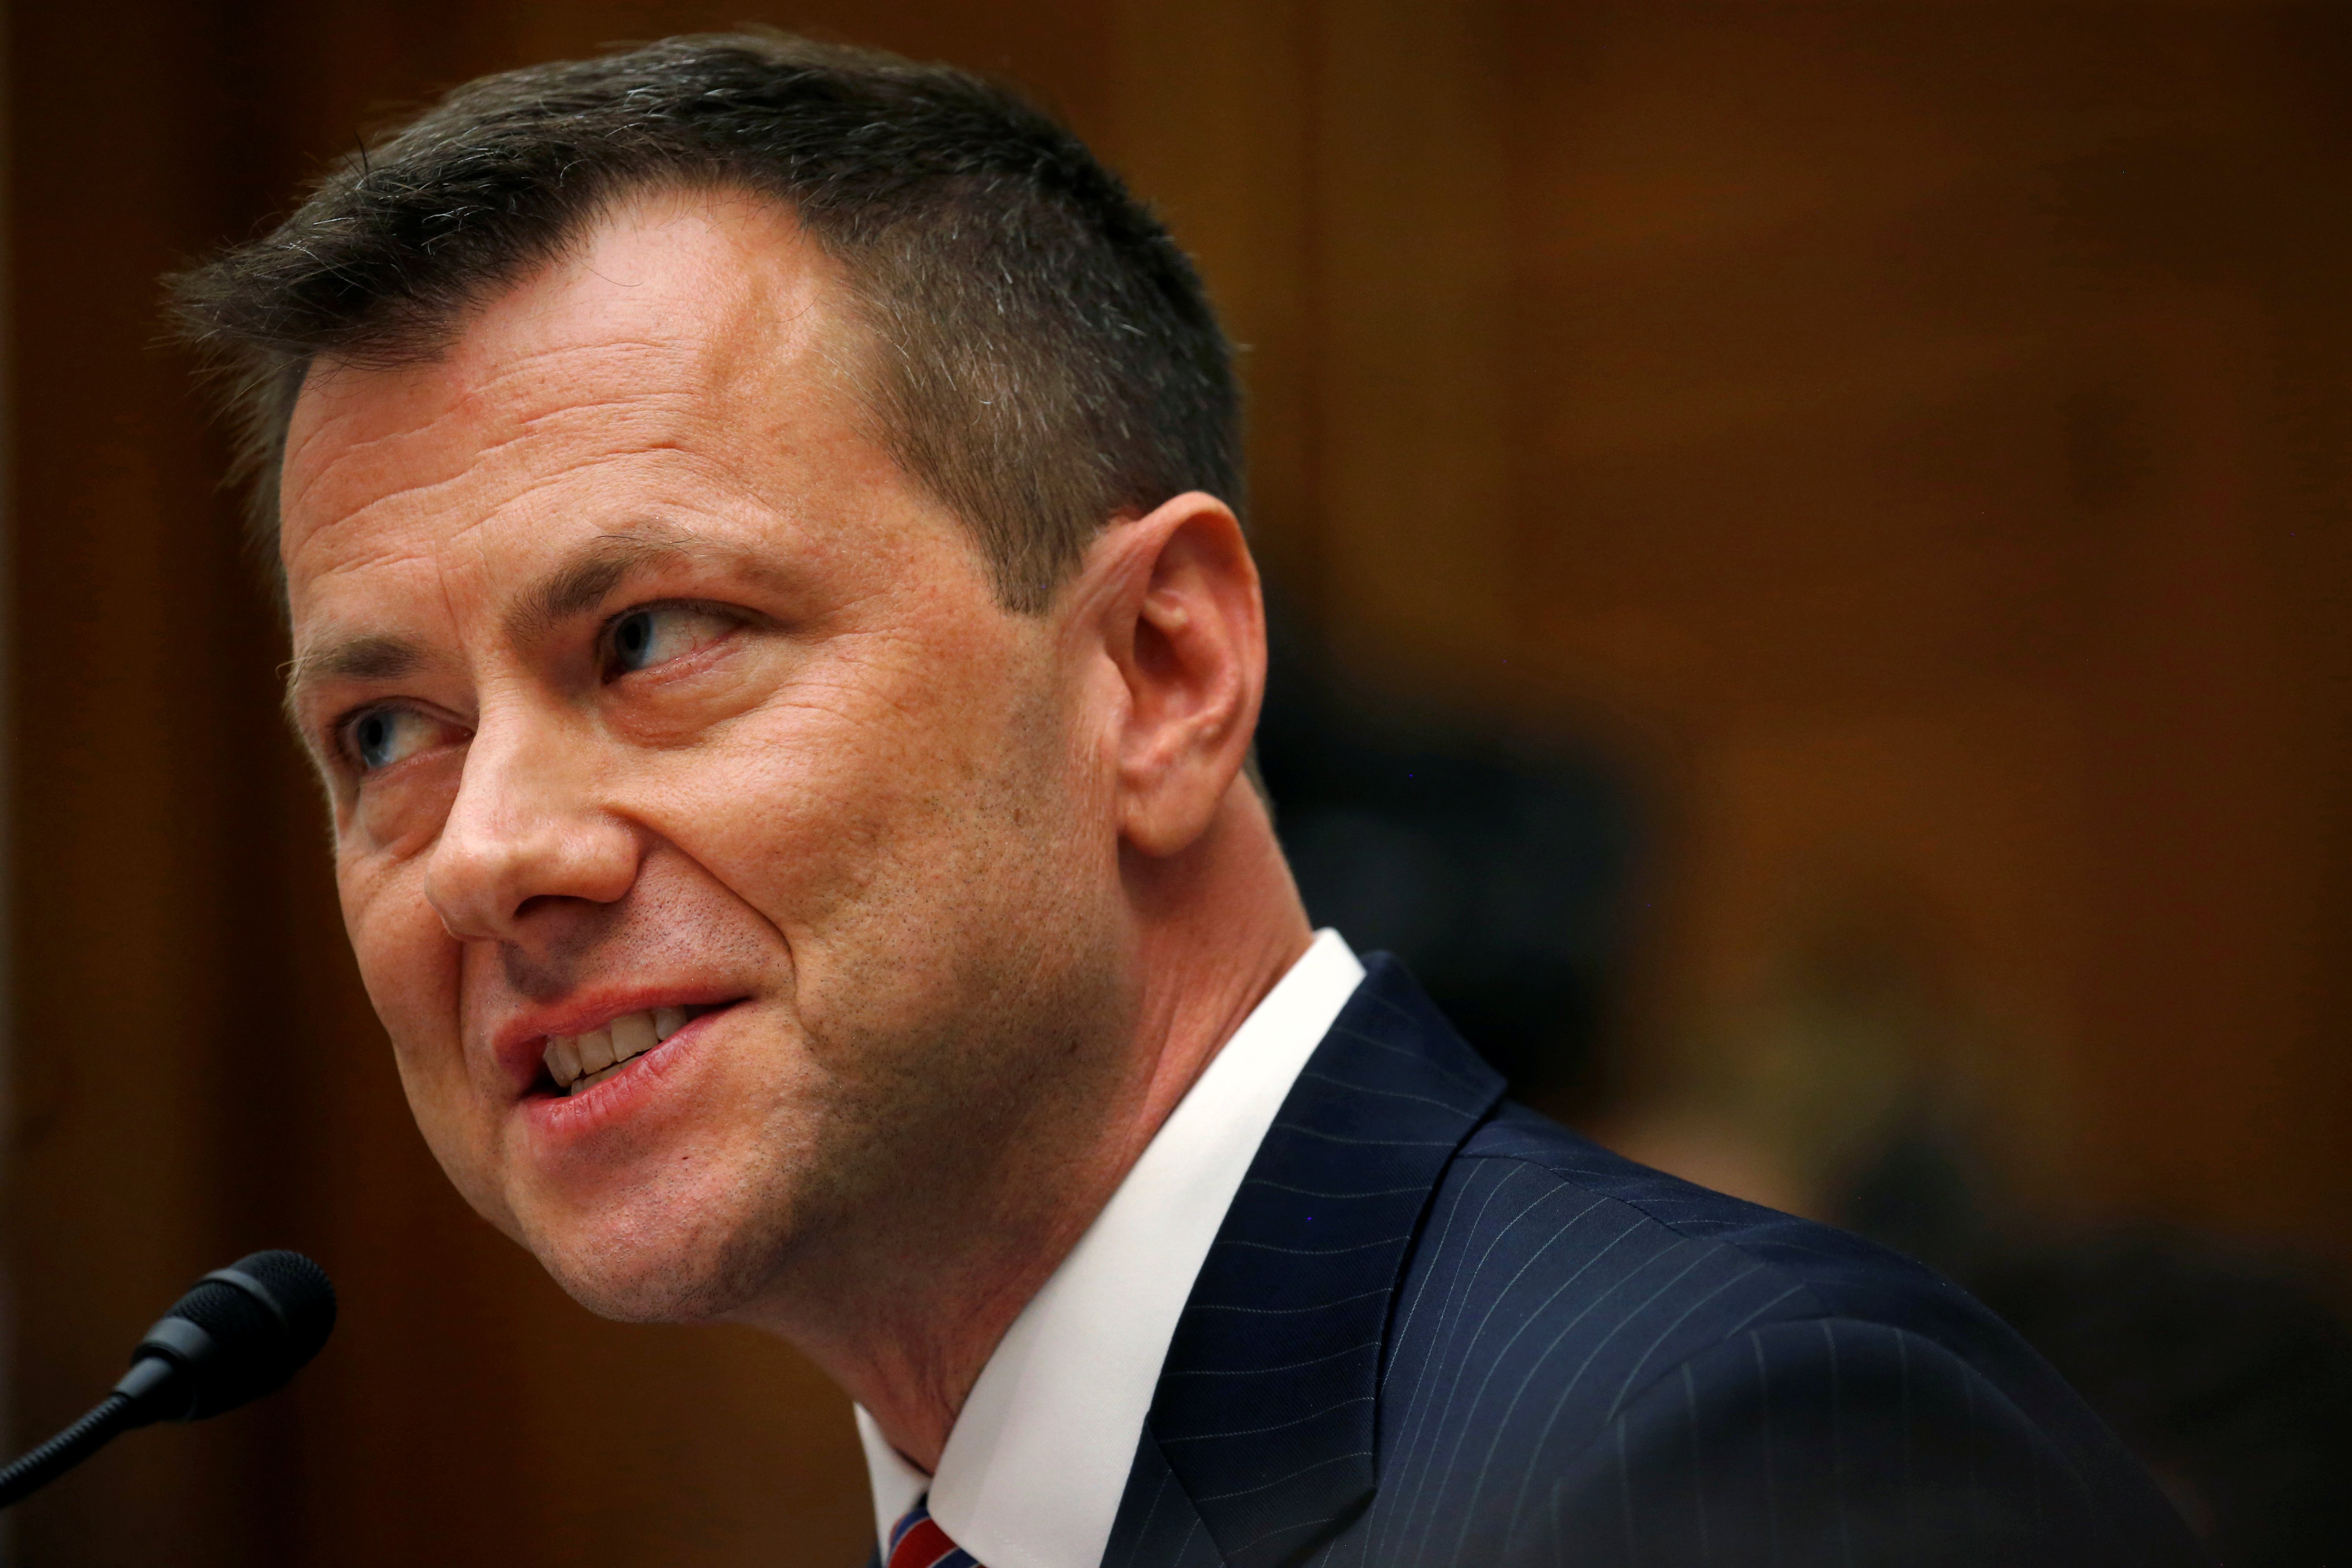 FBI Deputy Assistant Director Peter Strzok testifies before the House Committees on Judiciary and Oversight and Government Reform joint hearing on "Oversight of FBI and DOJ Actions Surrounding the 2016 Election" in the Rayburn House Office Building in Washington, U.S., July 12, 2018. REUTERS/Leah Millis